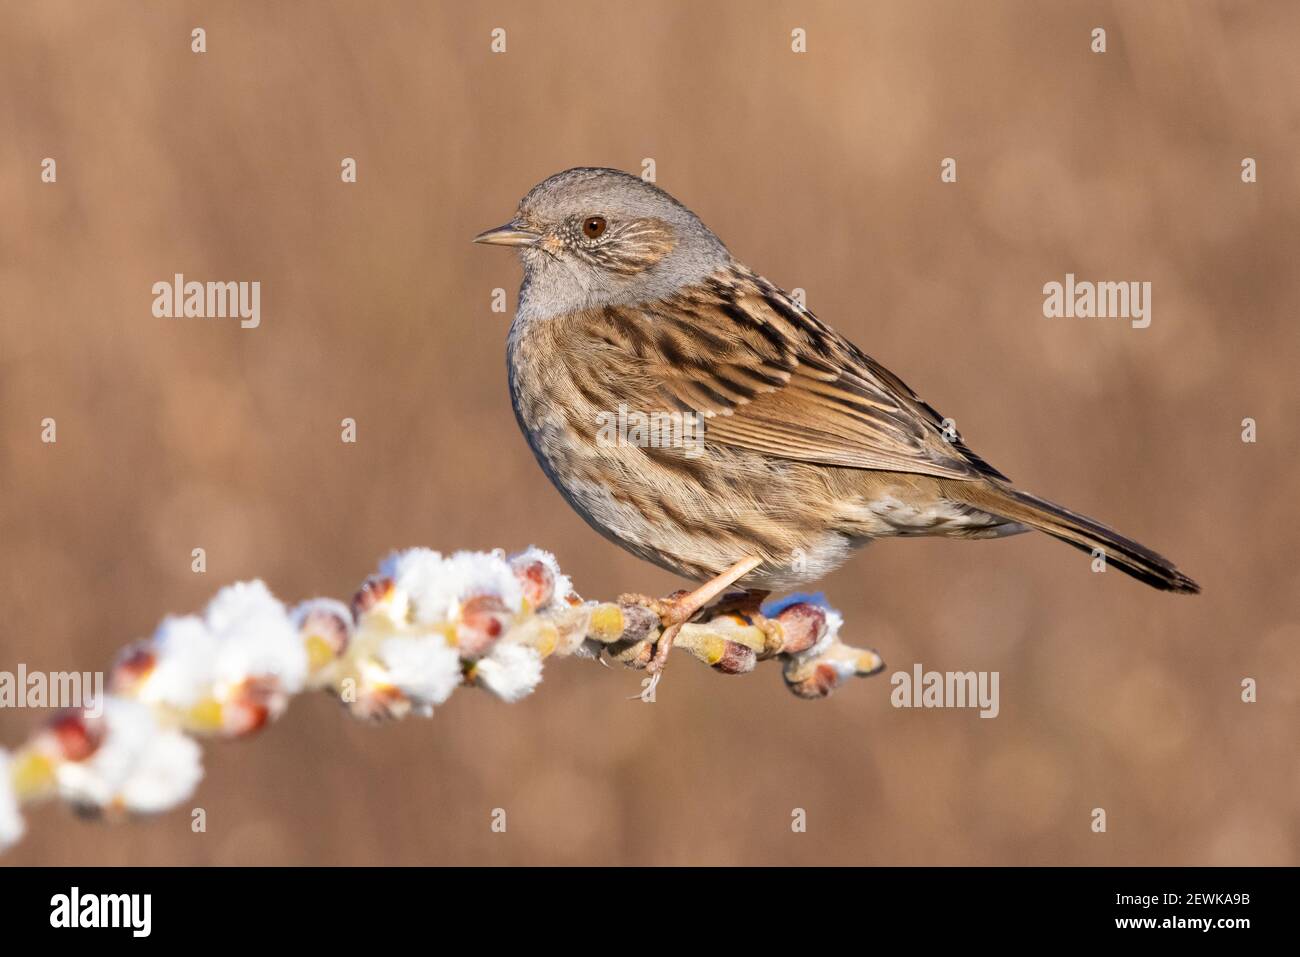 Dunnock (Prunella modularis), side vie wof an adult perched on a branch, Campania, Italy Stock Photo